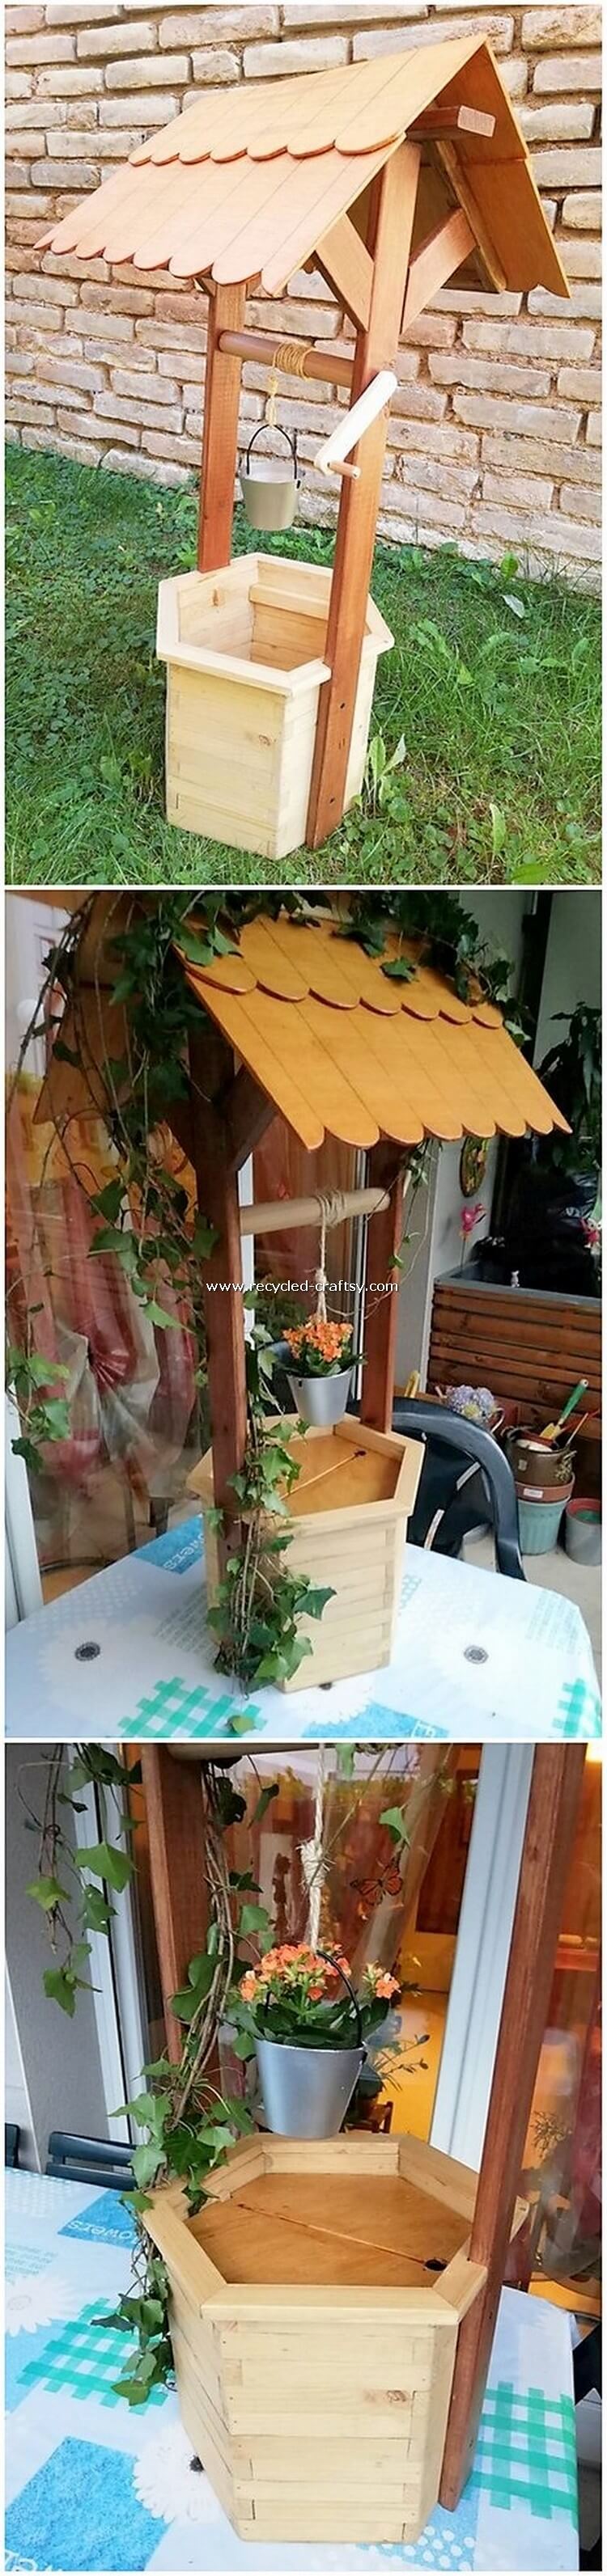 Pallet Wishing Well Planter